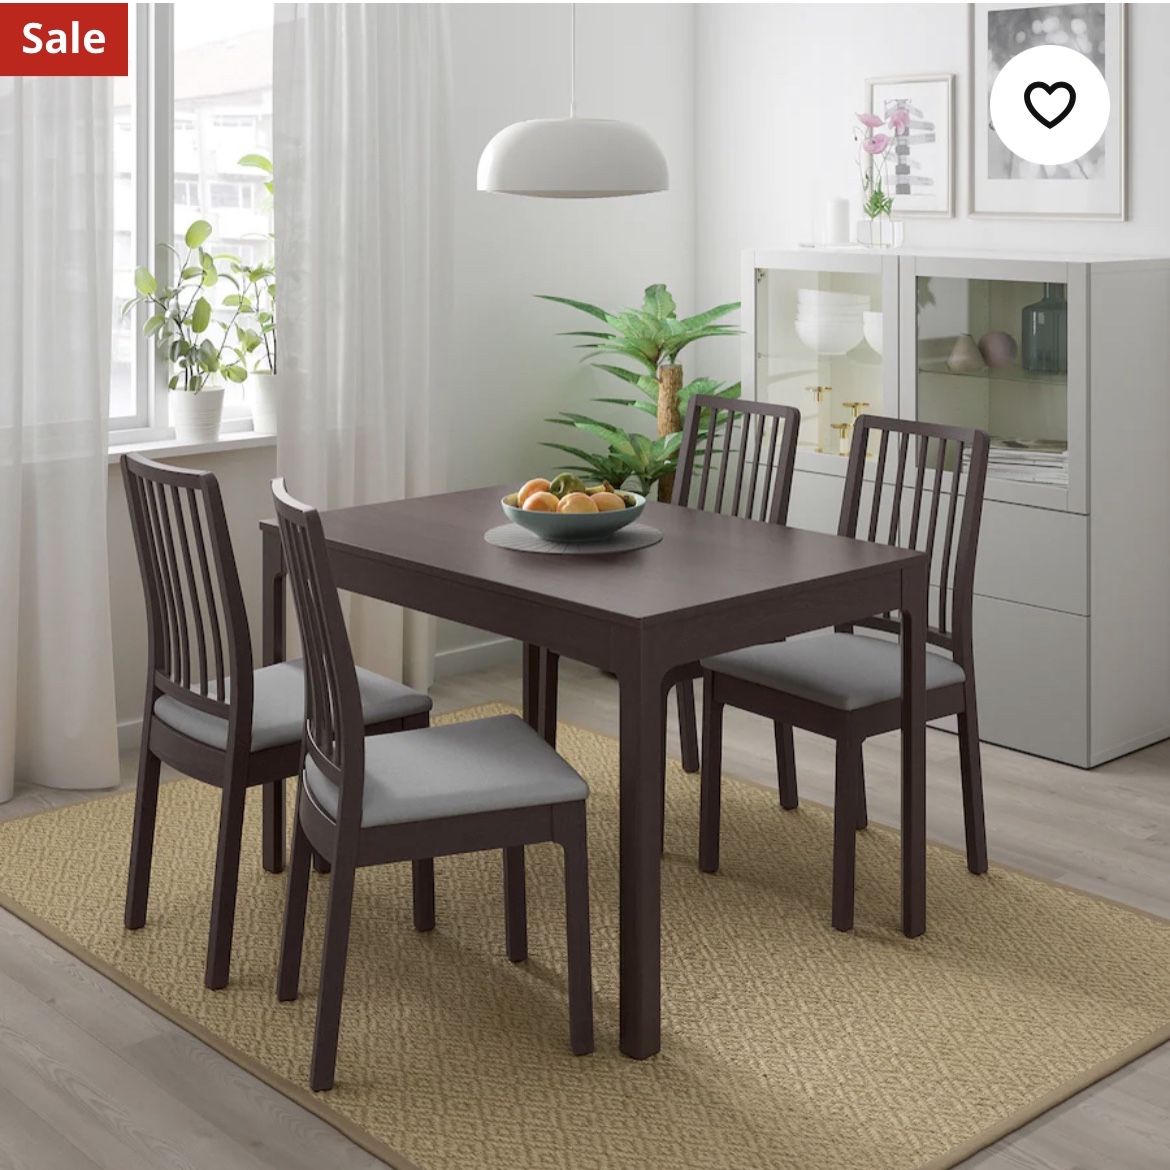 IKEA Extendable Dining table with 4 chairs